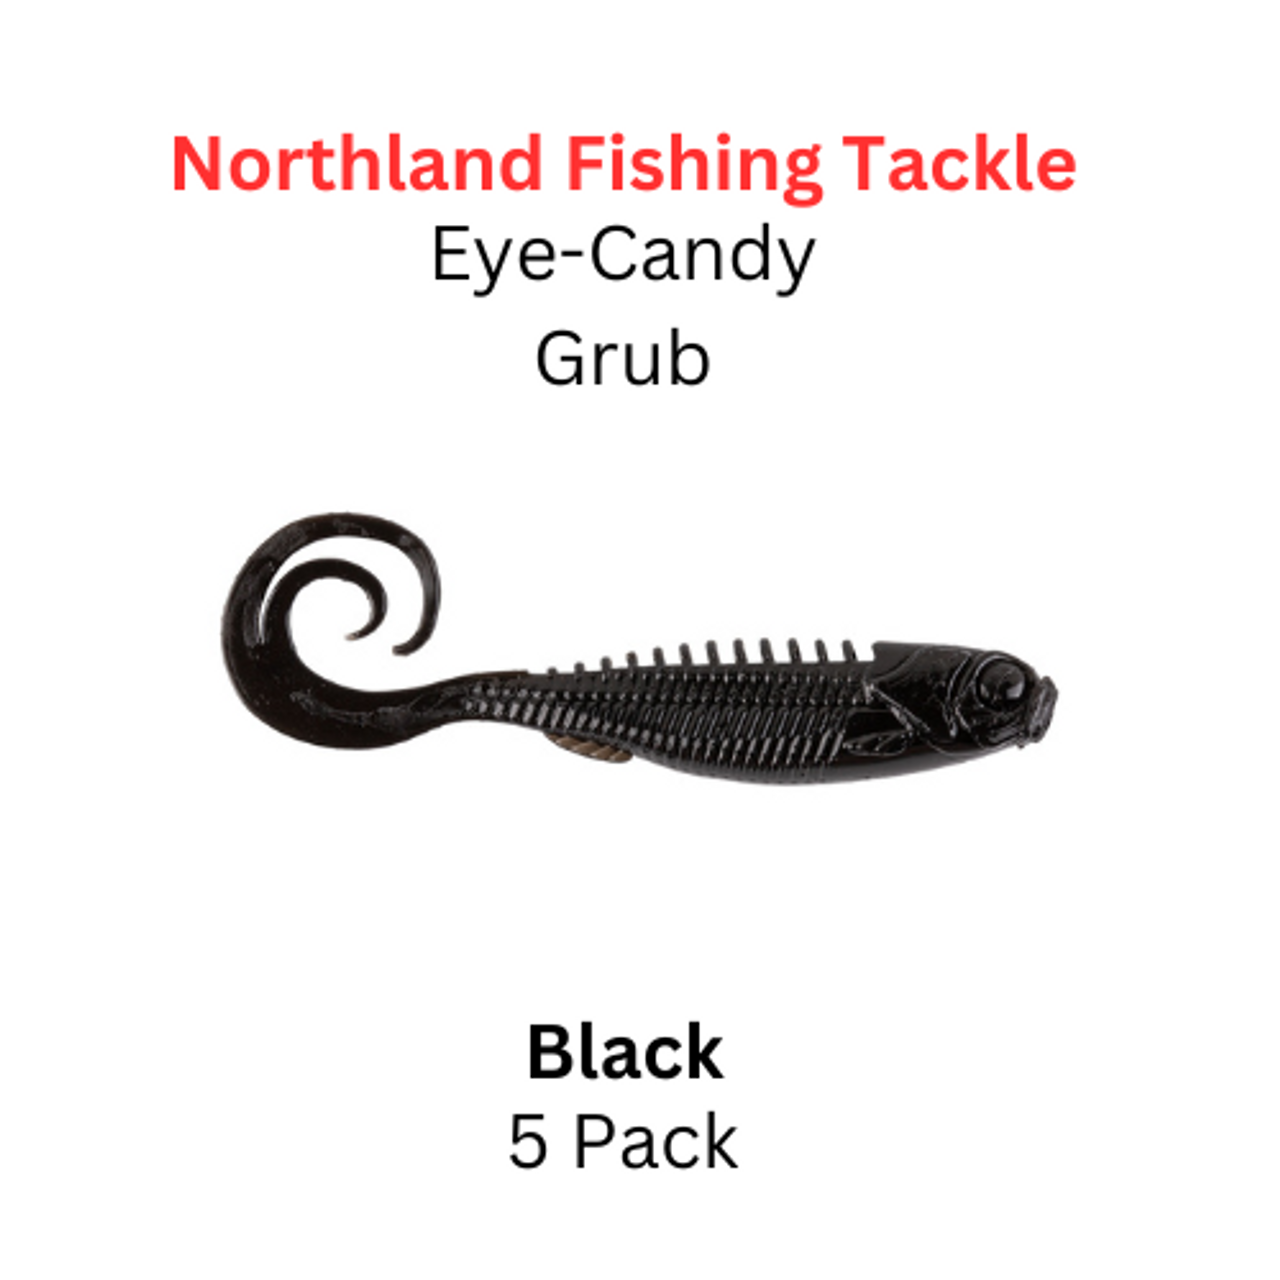 https://cdn11.bigcommerce.com/s-u9nbd/images/stencil/1280x1280/products/6652/16839/Northland_Fishing_Tackle_Eye_Candy_Grub_Black__98071.1688755669.png?c=2